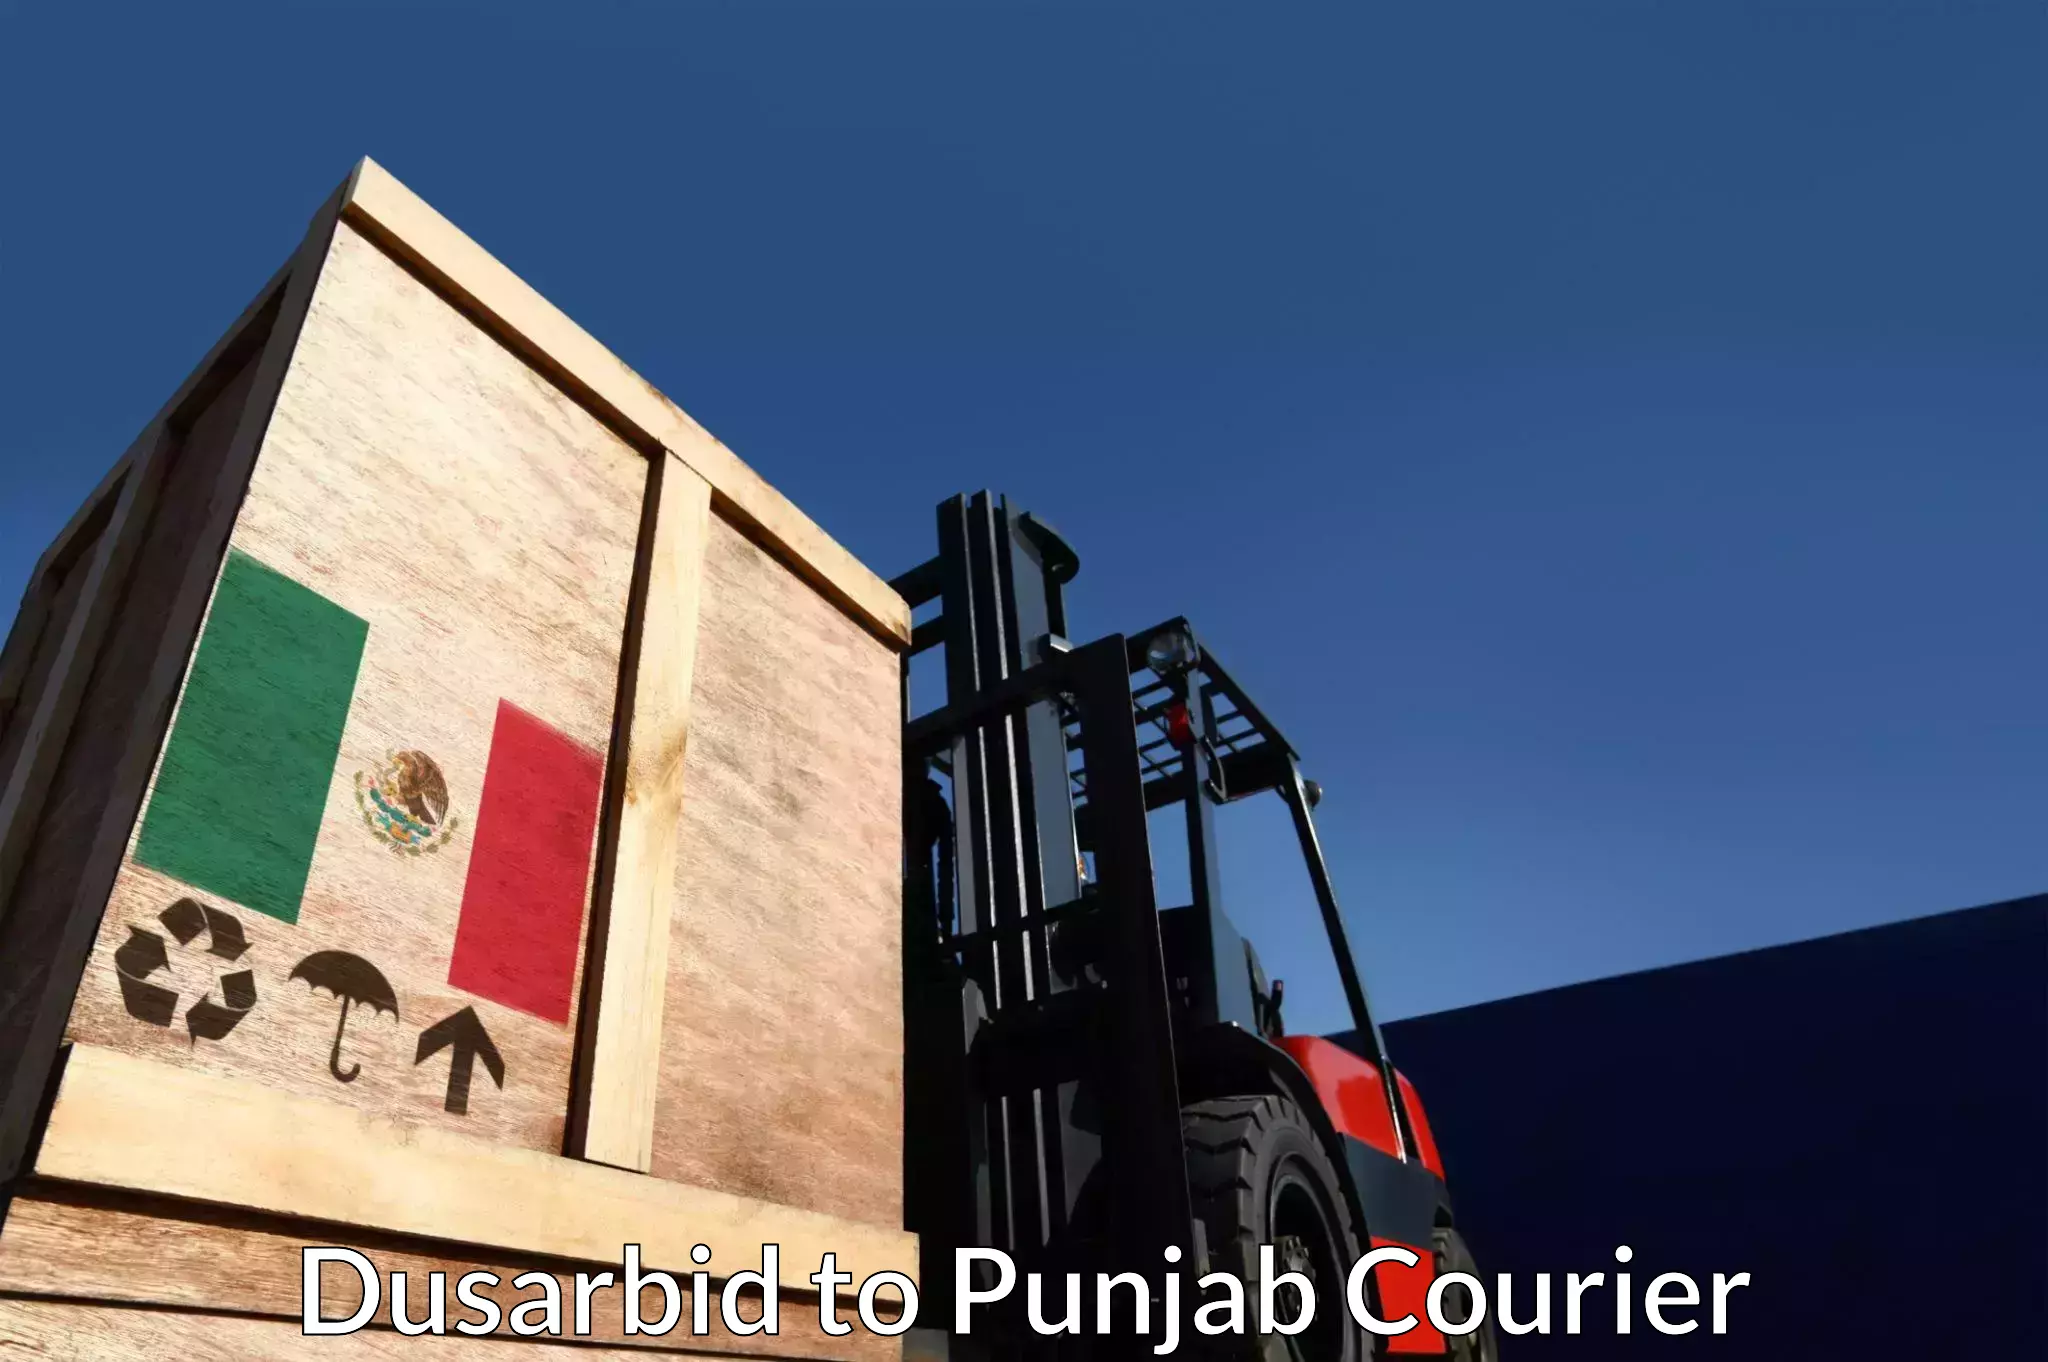 Subscription-based courier Dusarbid to Mohali